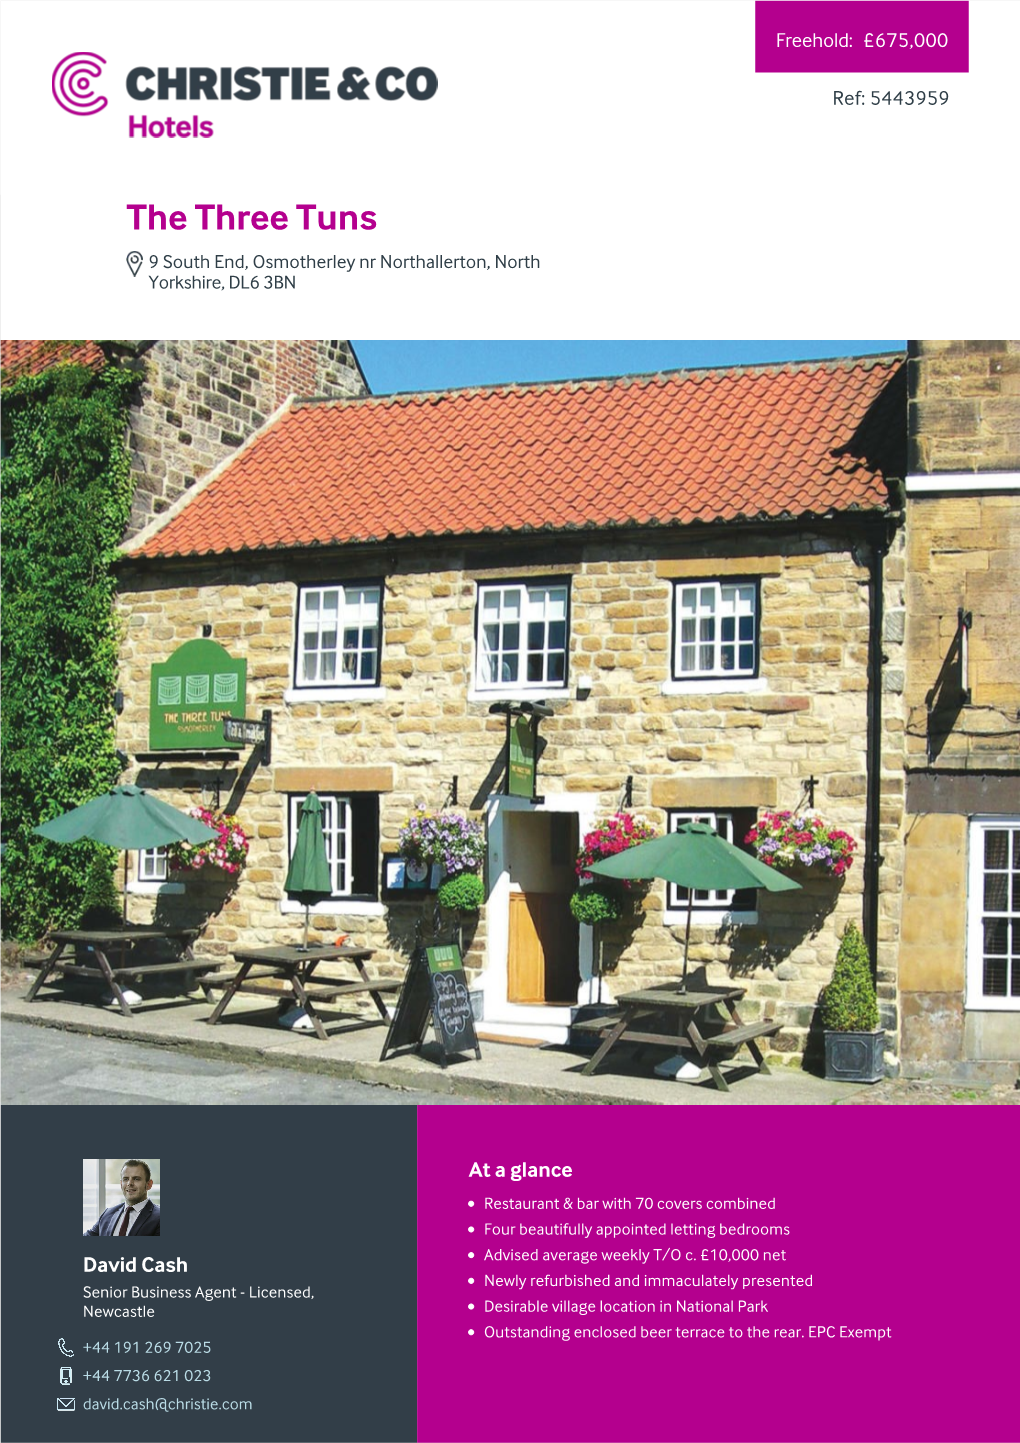 The Three Tuns 9 South End, Osmotherley Nr Northallerton, North Yorkshire, DL6 3BN